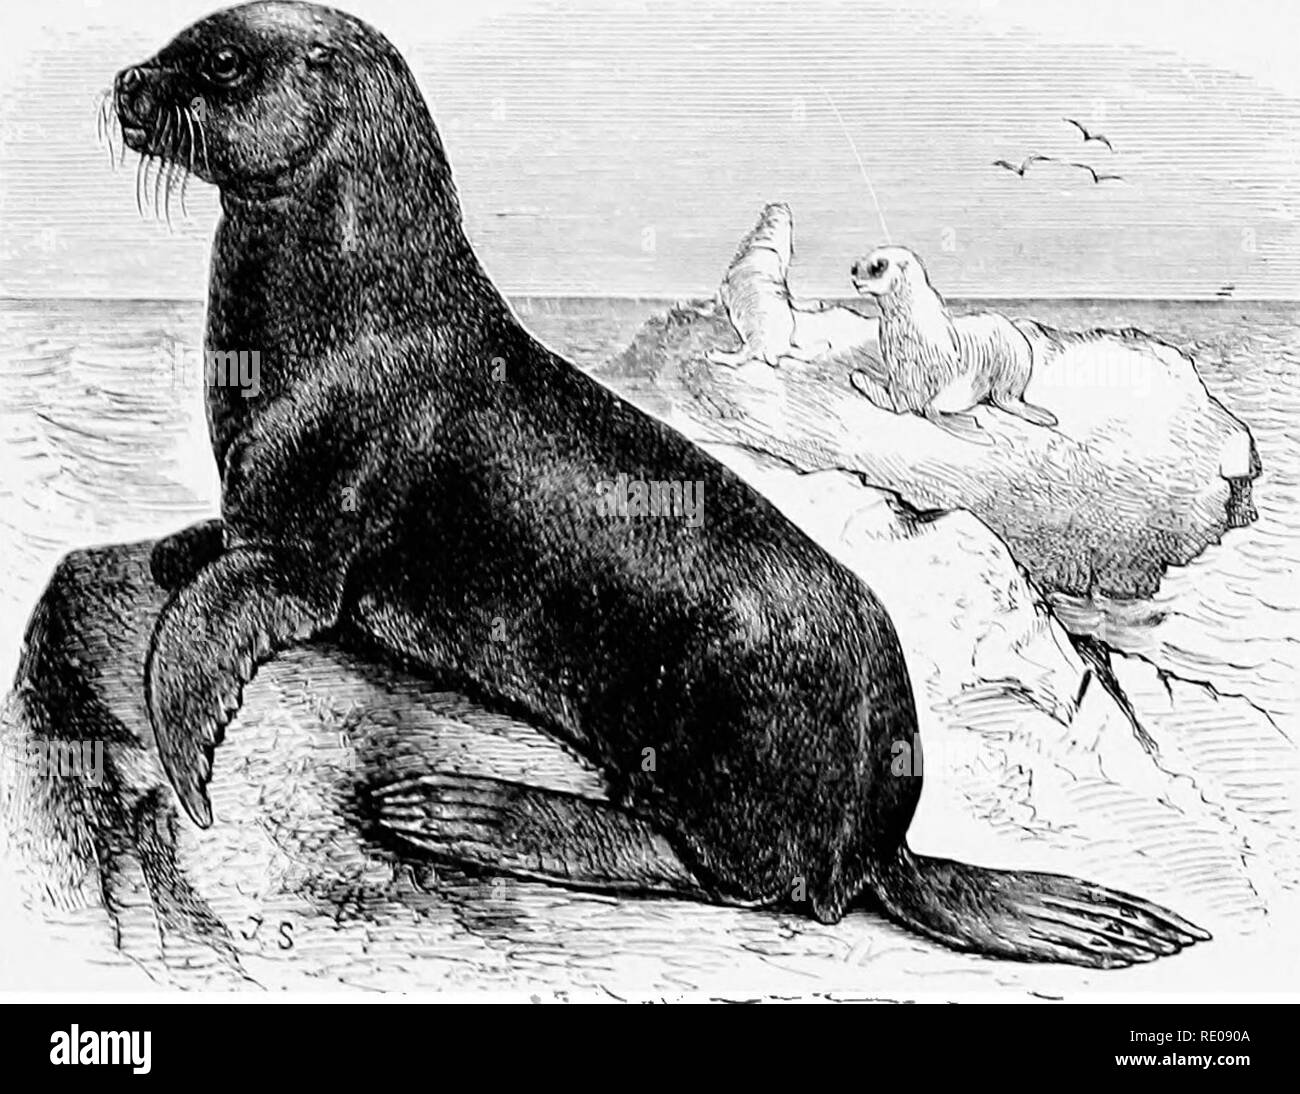 . An introduction to the study of mammals living and extinct. Mammals. 0'/:iAV/D./: 595 otliors, from tho coiists of Australia :&gt;iul various islands scattered over tho soiitborn hoiuisphero. These ha.e lieeu grouped by some /.oologists into many genera, founded upon 'ery trivial modifiea- tions of teeth and skull. In a reeeut memoir Mr. Boddard ^ eon- eludes that if the genus be split up at all, it should be divided into ()lttriii, eontaiuing only 0. jiihii/ii (with its numerous synonyms), and .1 ir/dciplialiin, eoniprising all tho other speeies. The latter group is distinguished by the m Stock Photo